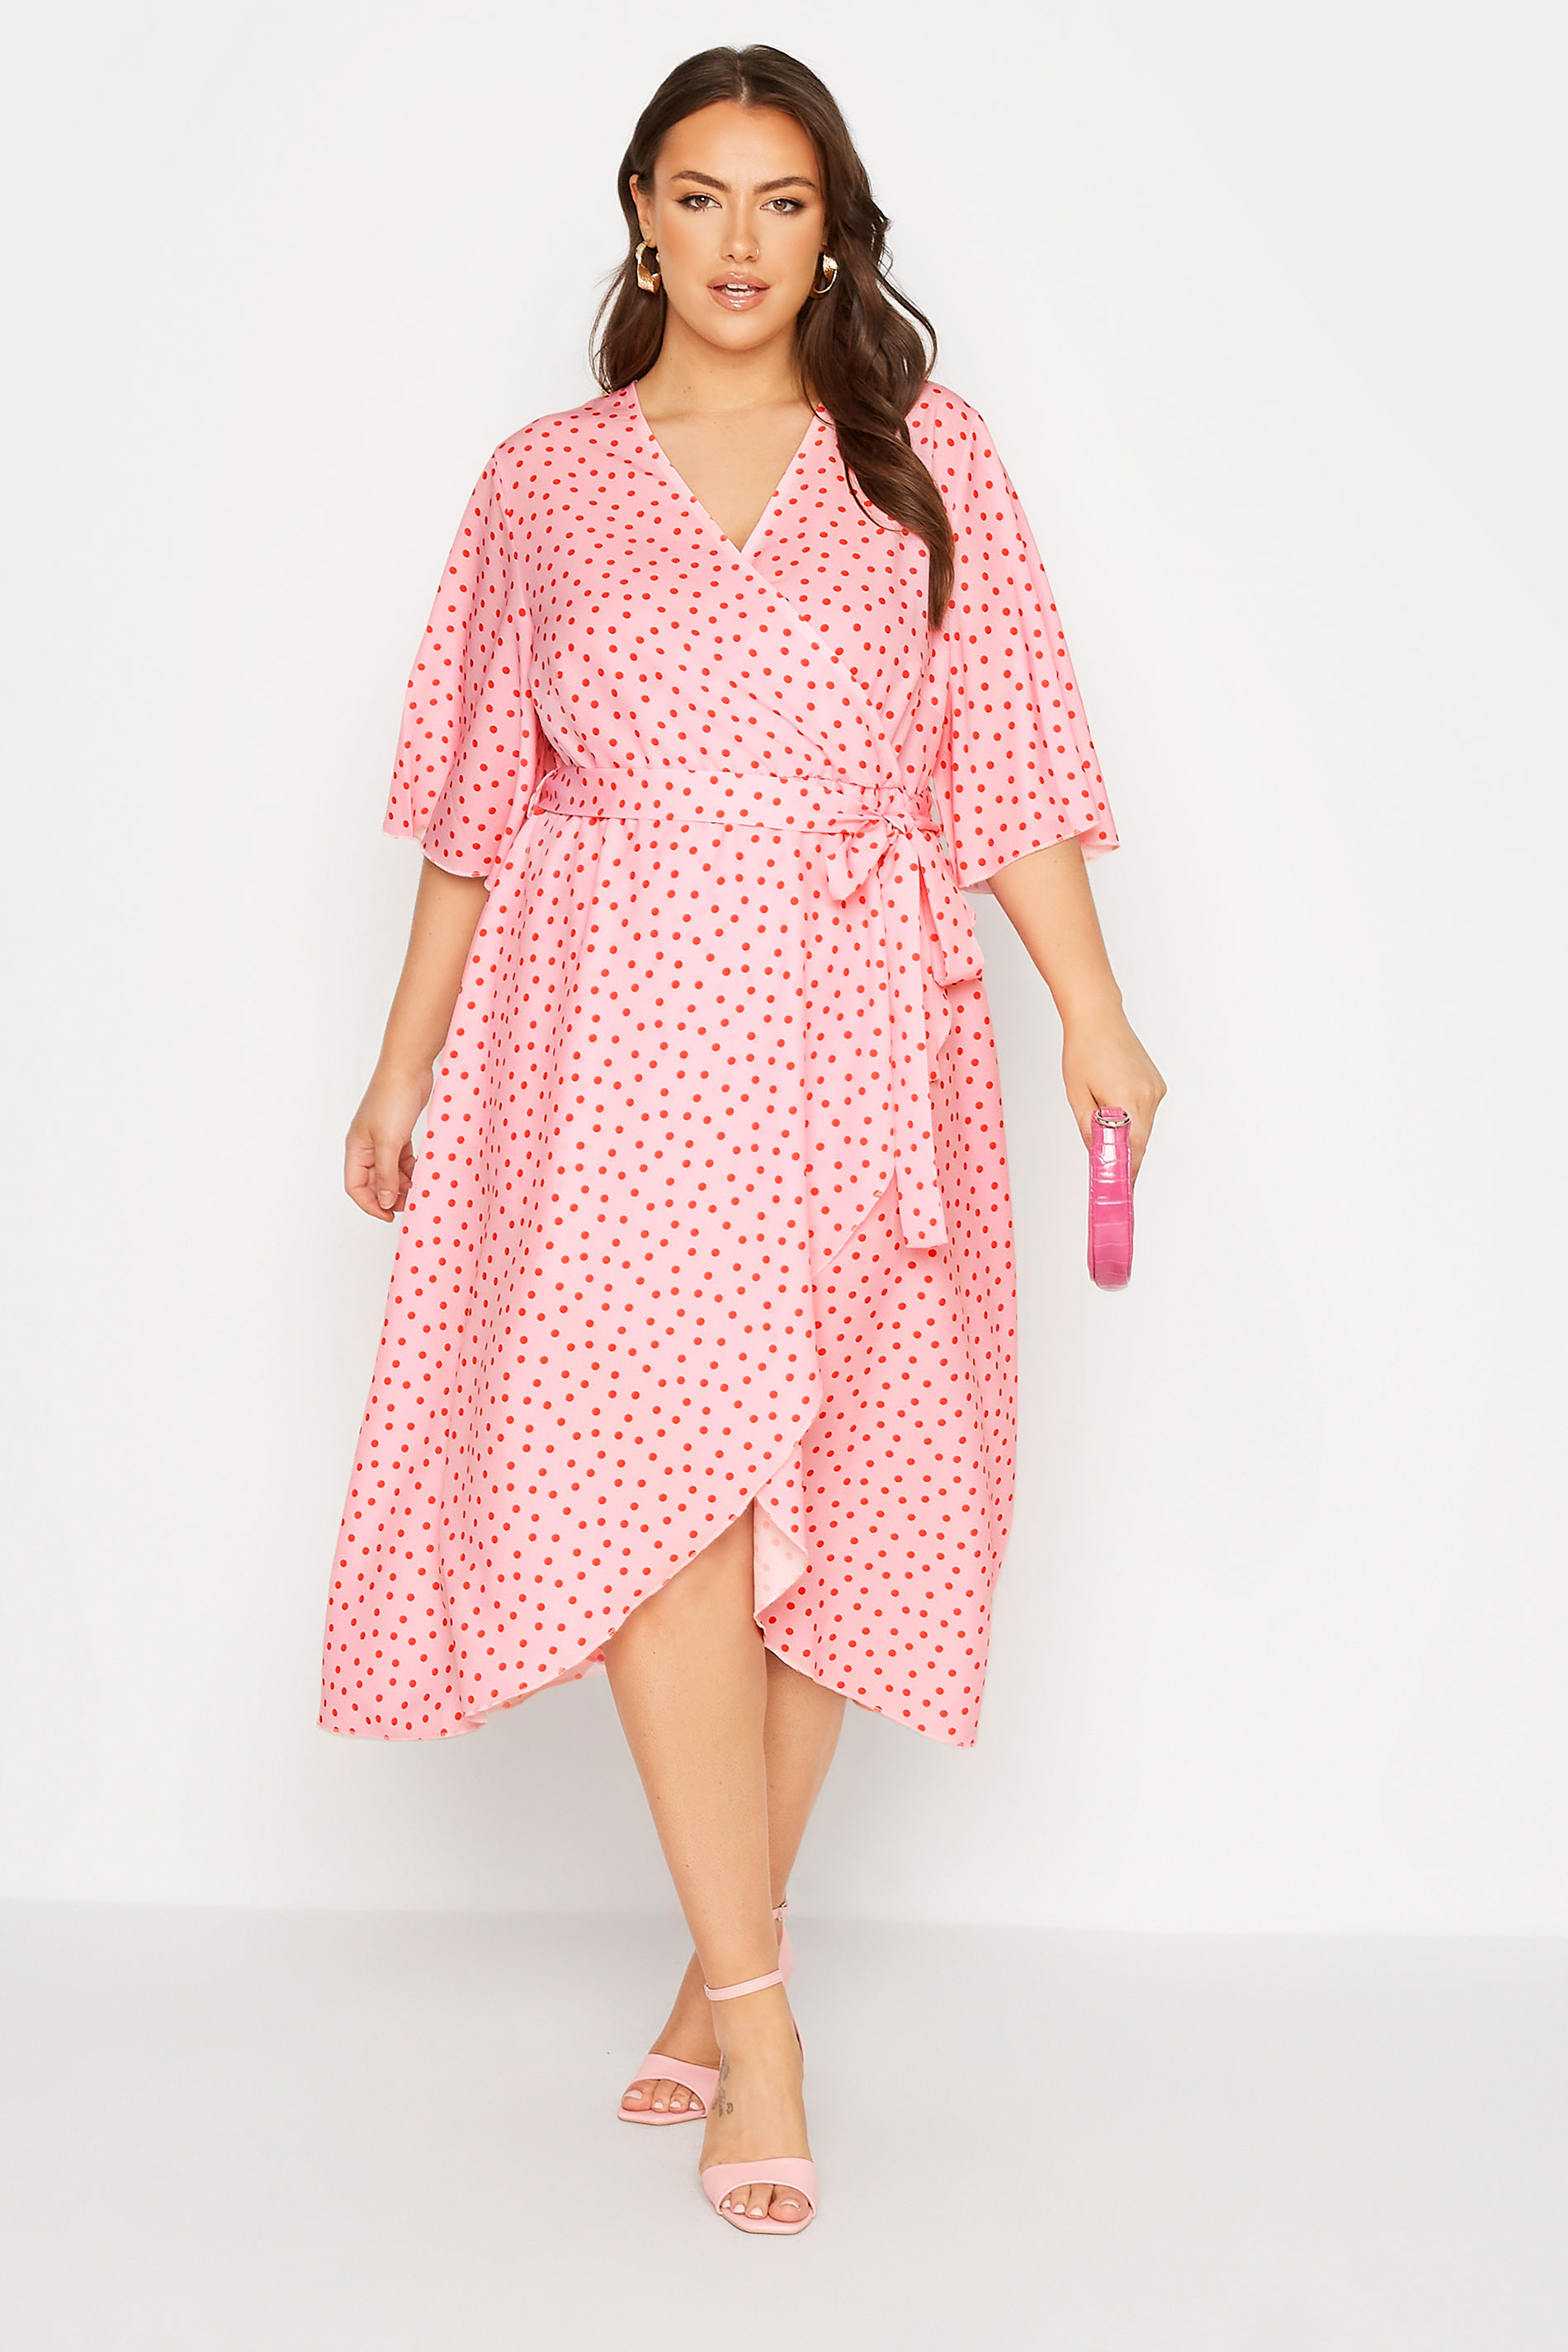 Robes Grande Taille Grande taille  Robes Portefeuilles | YOURS LONDON - Robe Rose à Pois Rouge Style Portefeuille - YQ73364